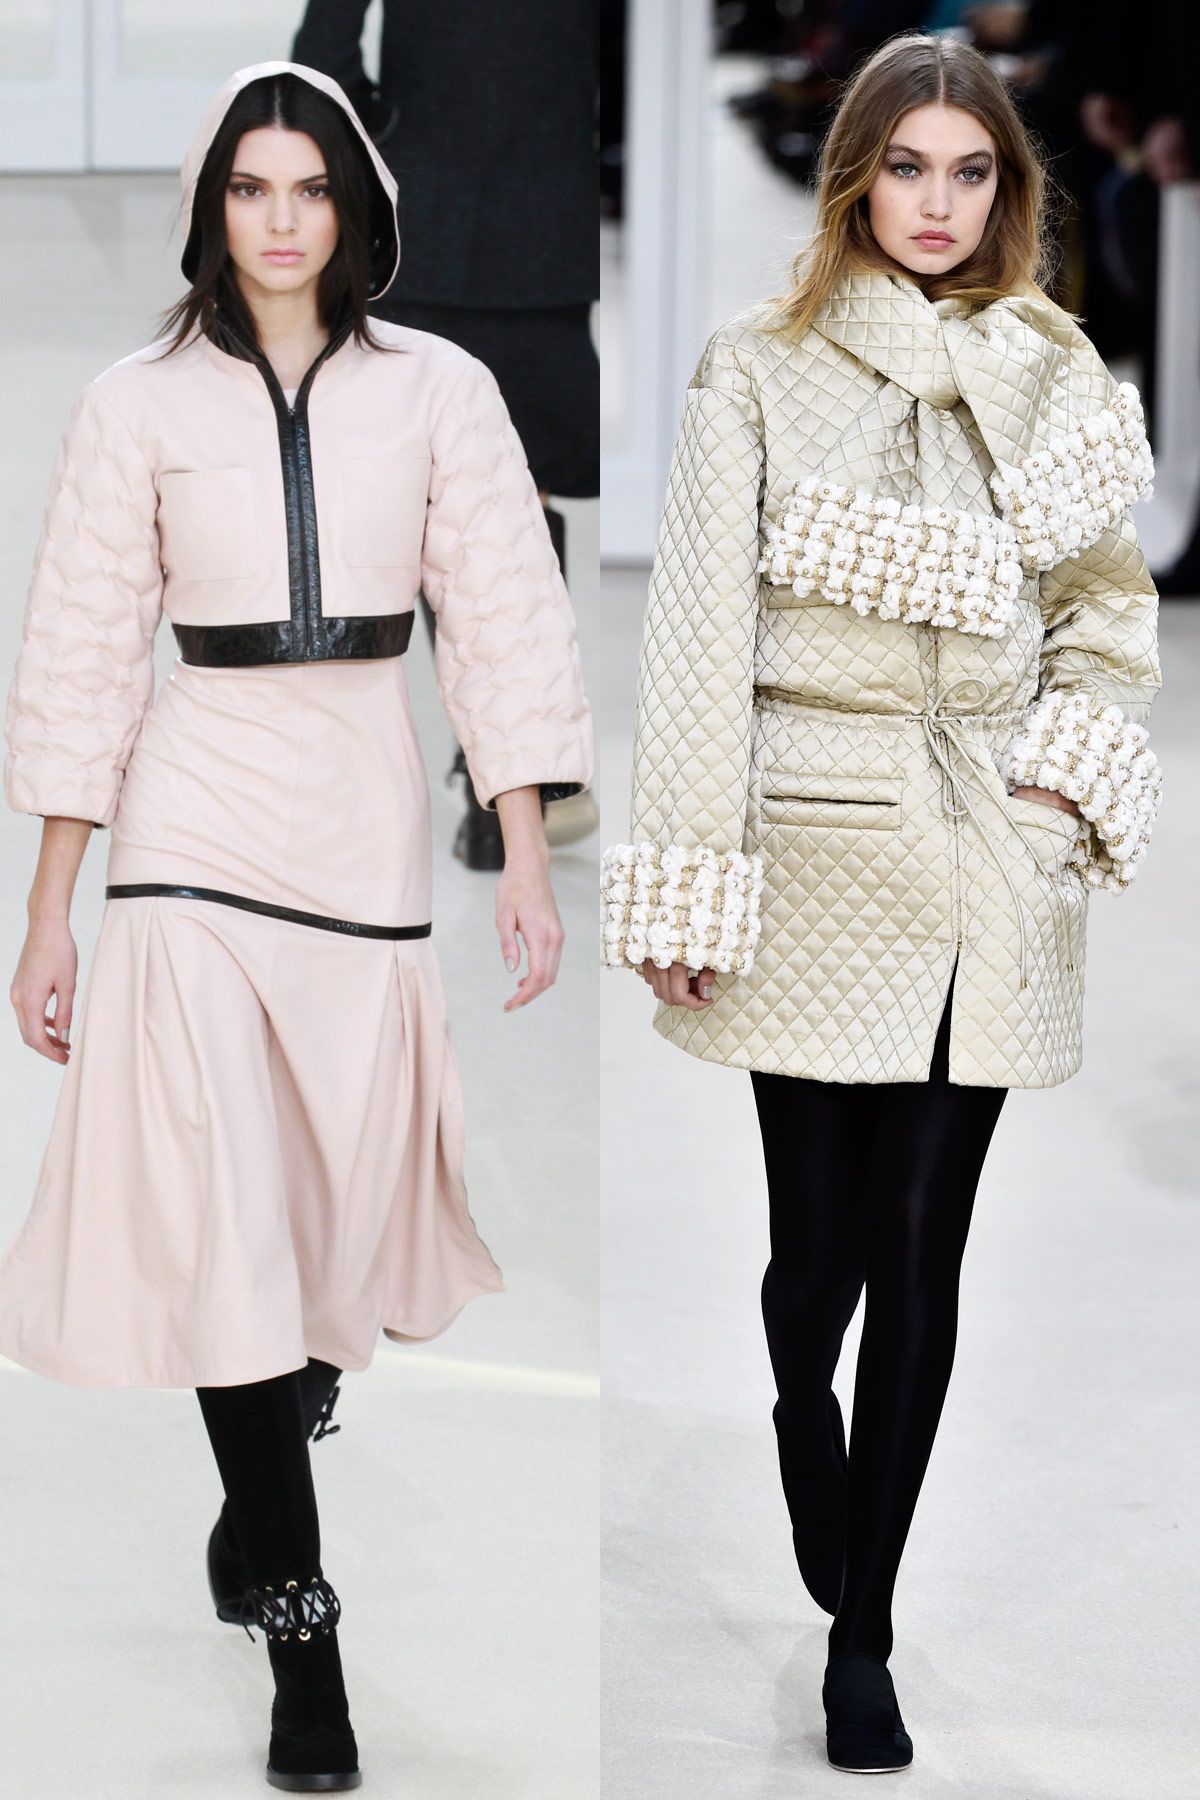 Everything You Need to Know About Today’s Chanel Show